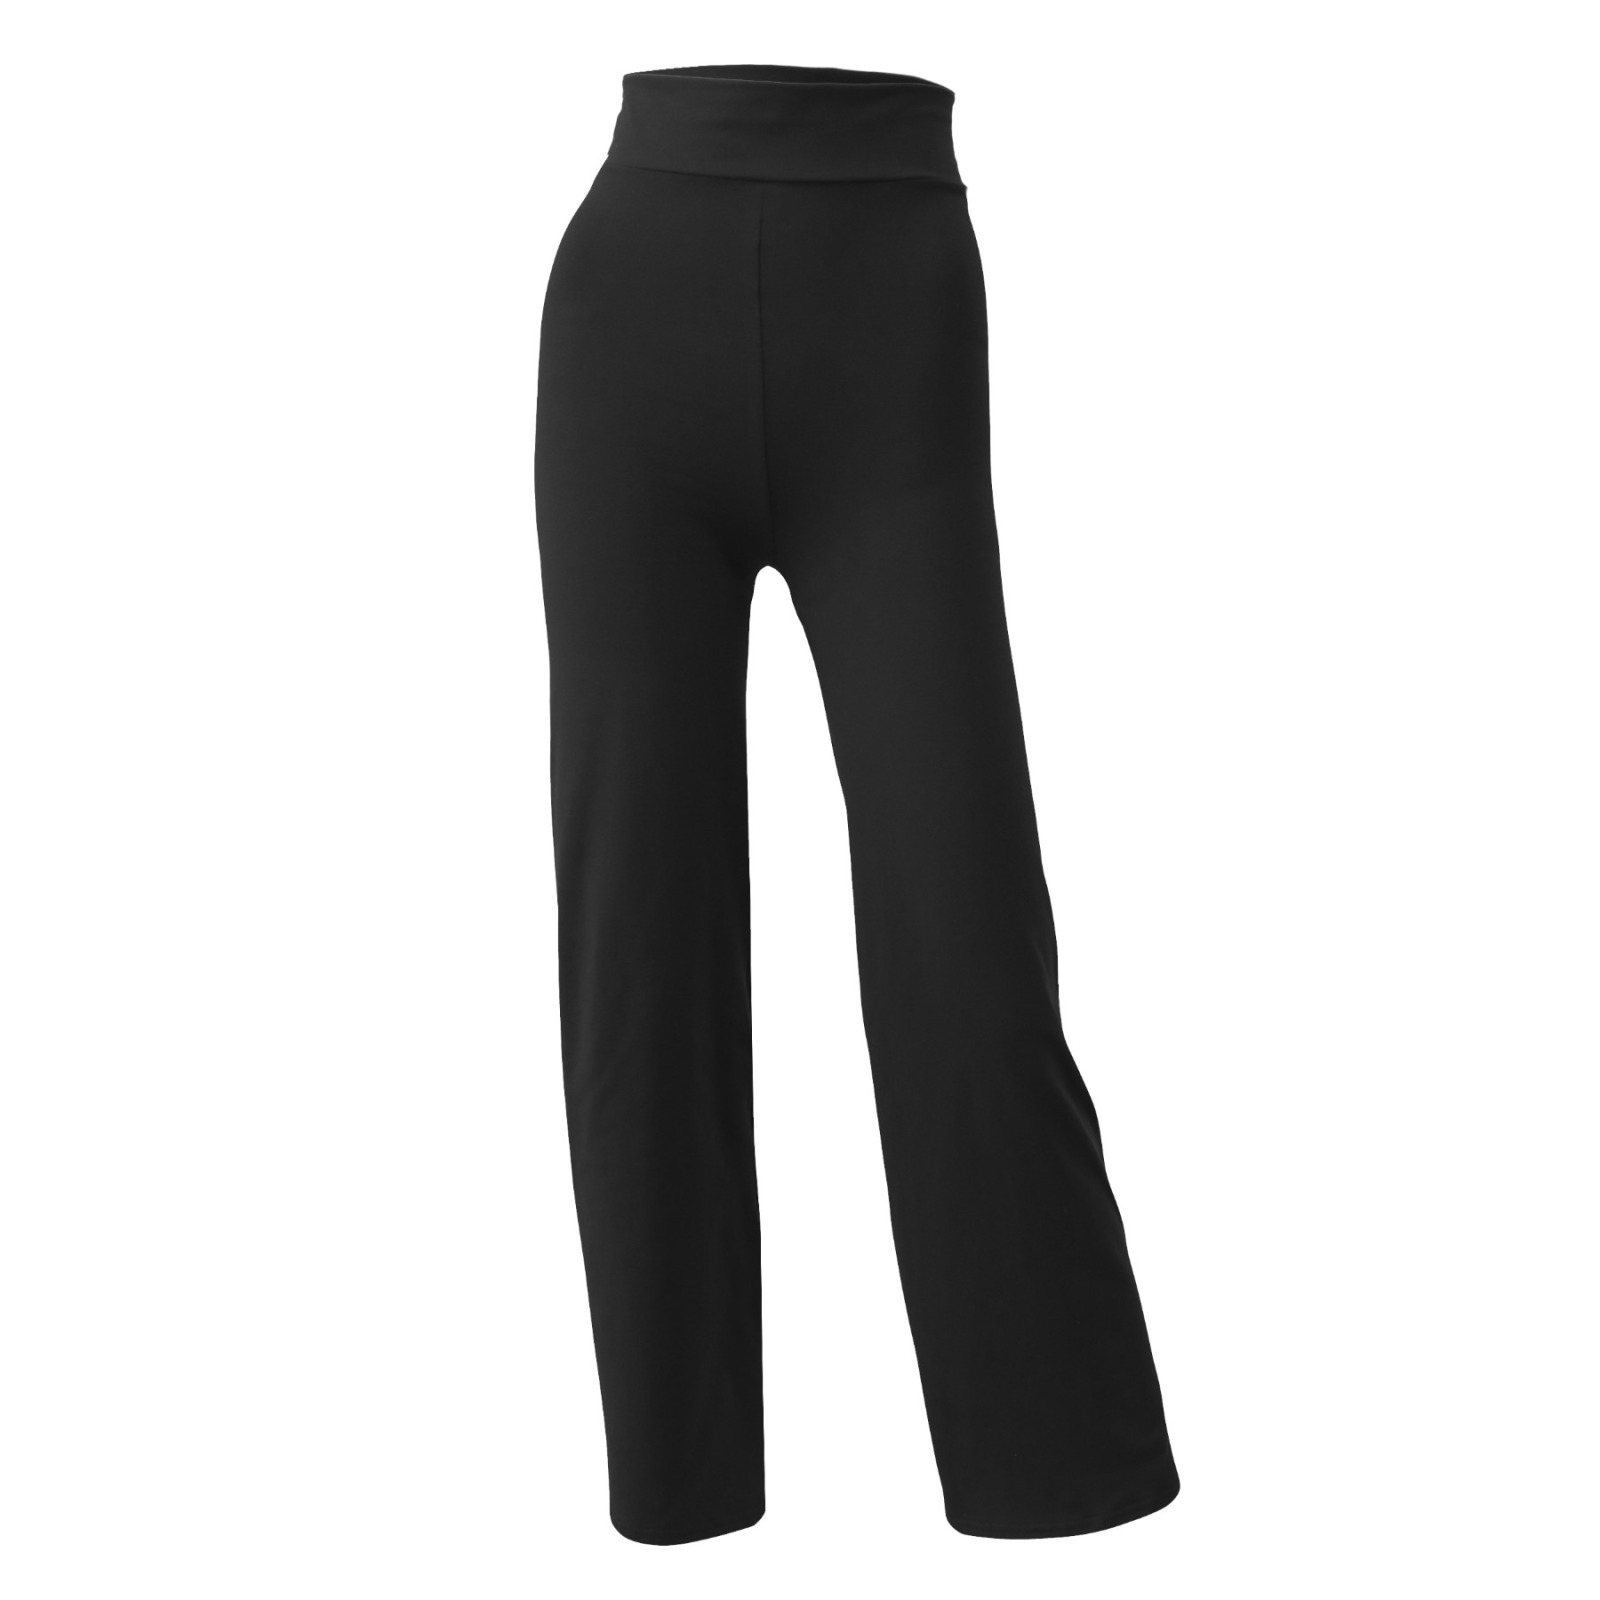 Yoga pants Relaxed Fit black